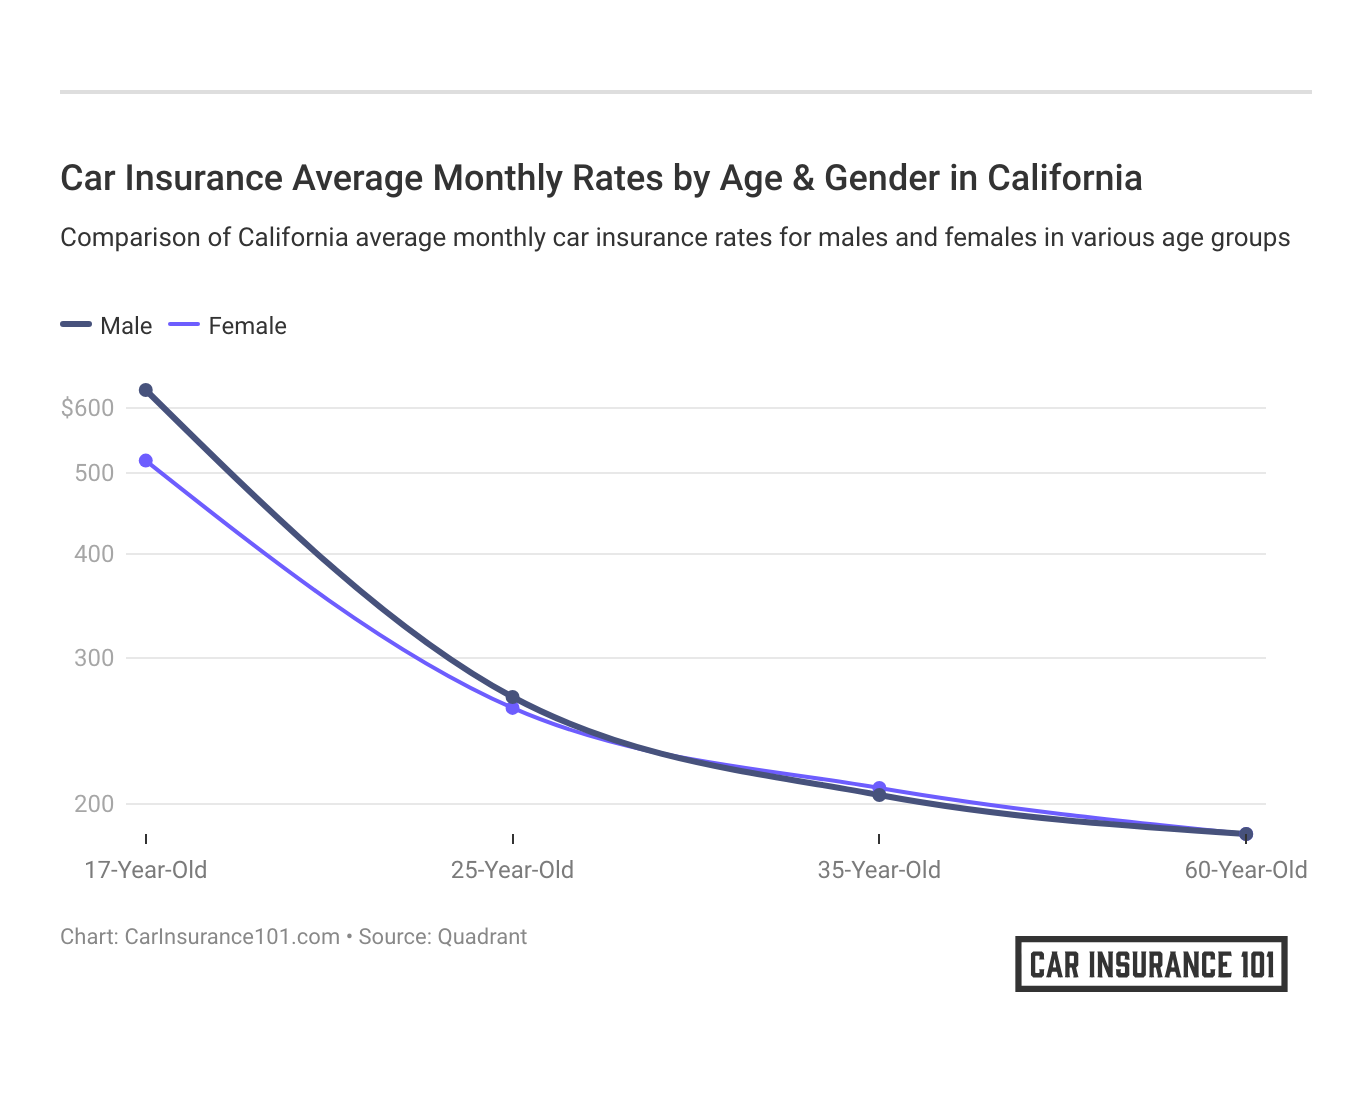 <h3>Car Insurance Average Monthly Rates by Age & Gender in California</h3>